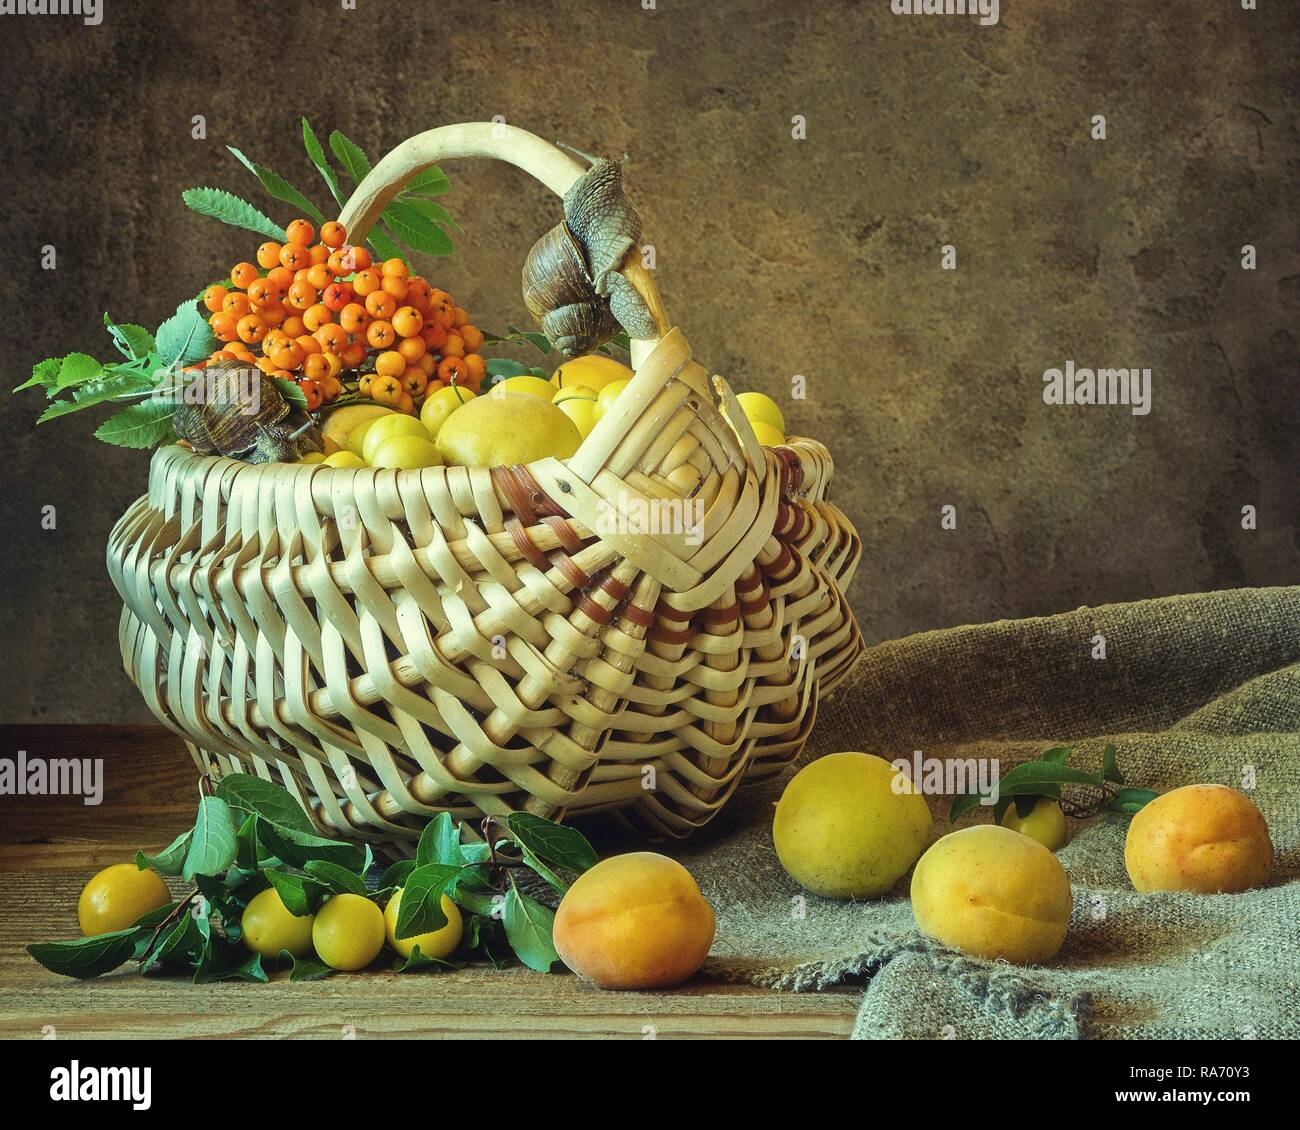 Still life with fruits Stock Photo